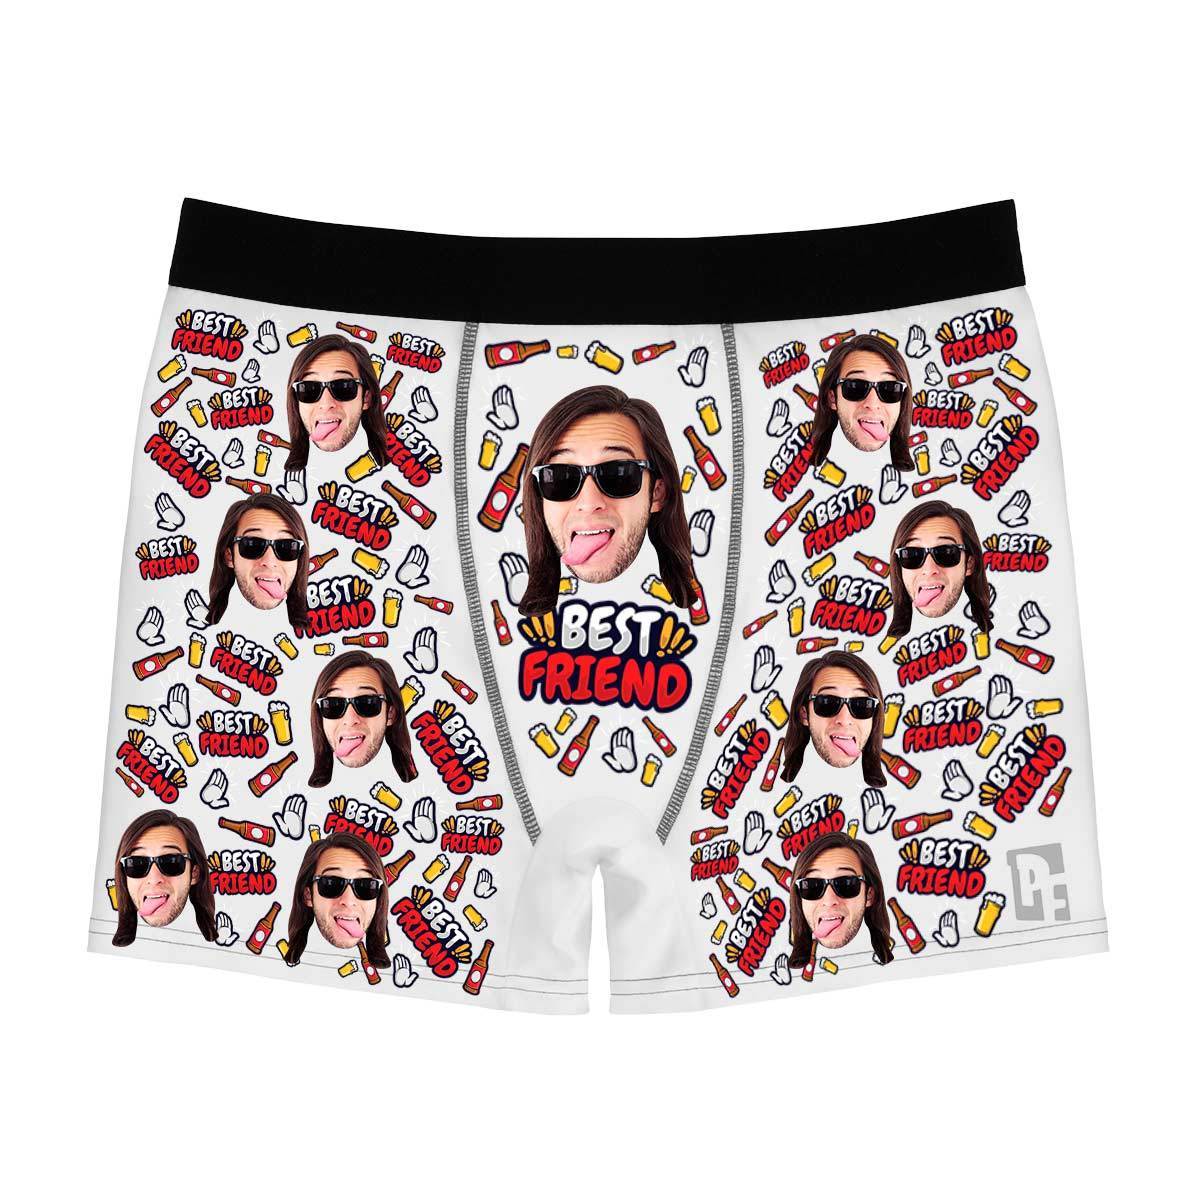 White BFF for him men's boxer briefs personalized with photo printed on them